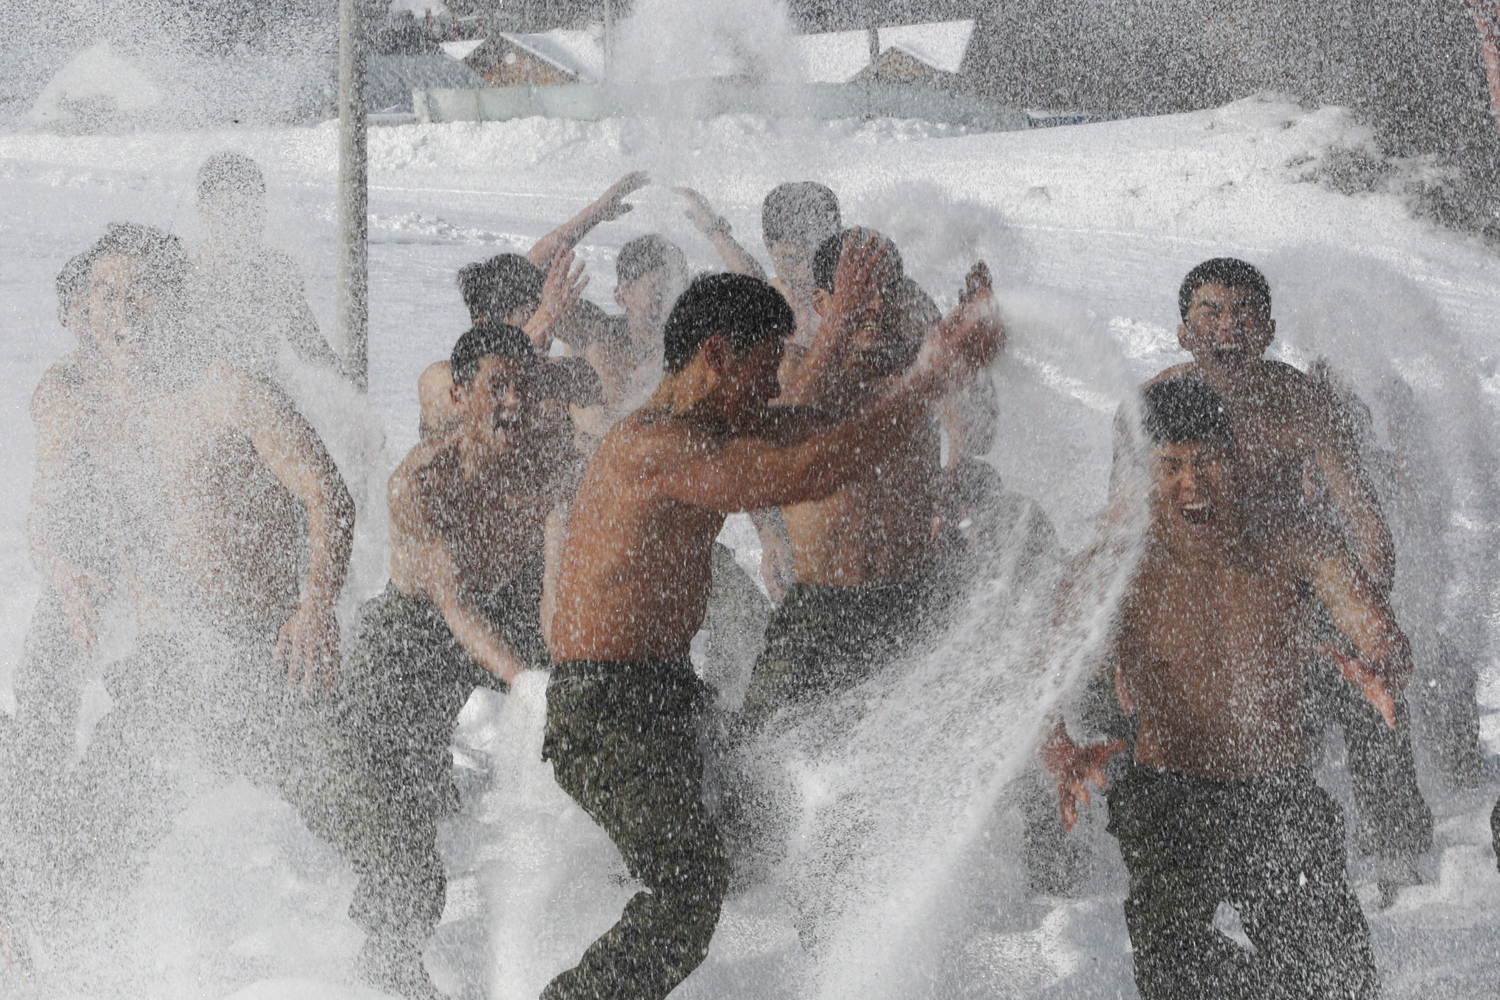 January 11, 2012. Half-naked South Korean Special Warfare Forces members hurl snow during a winter exercise in Pyeongchang, South Korea. More than 200 soldiers participated in the one-month winter exercise.